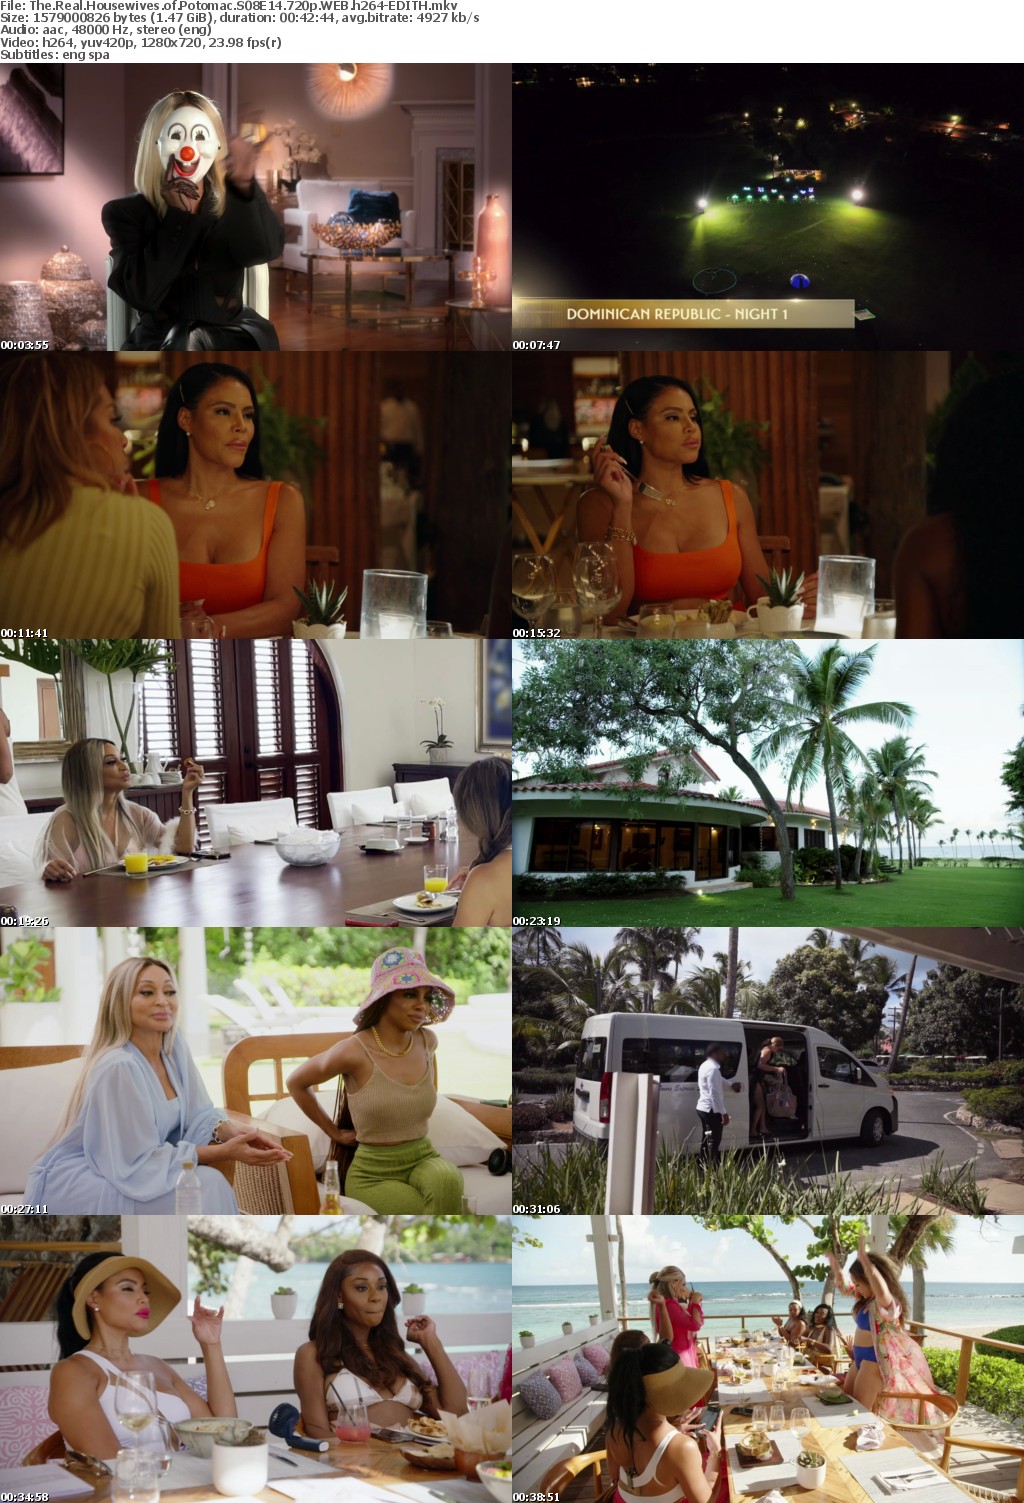 The Real Housewives of Potomac S08E14 720p WEB h264-EDITH